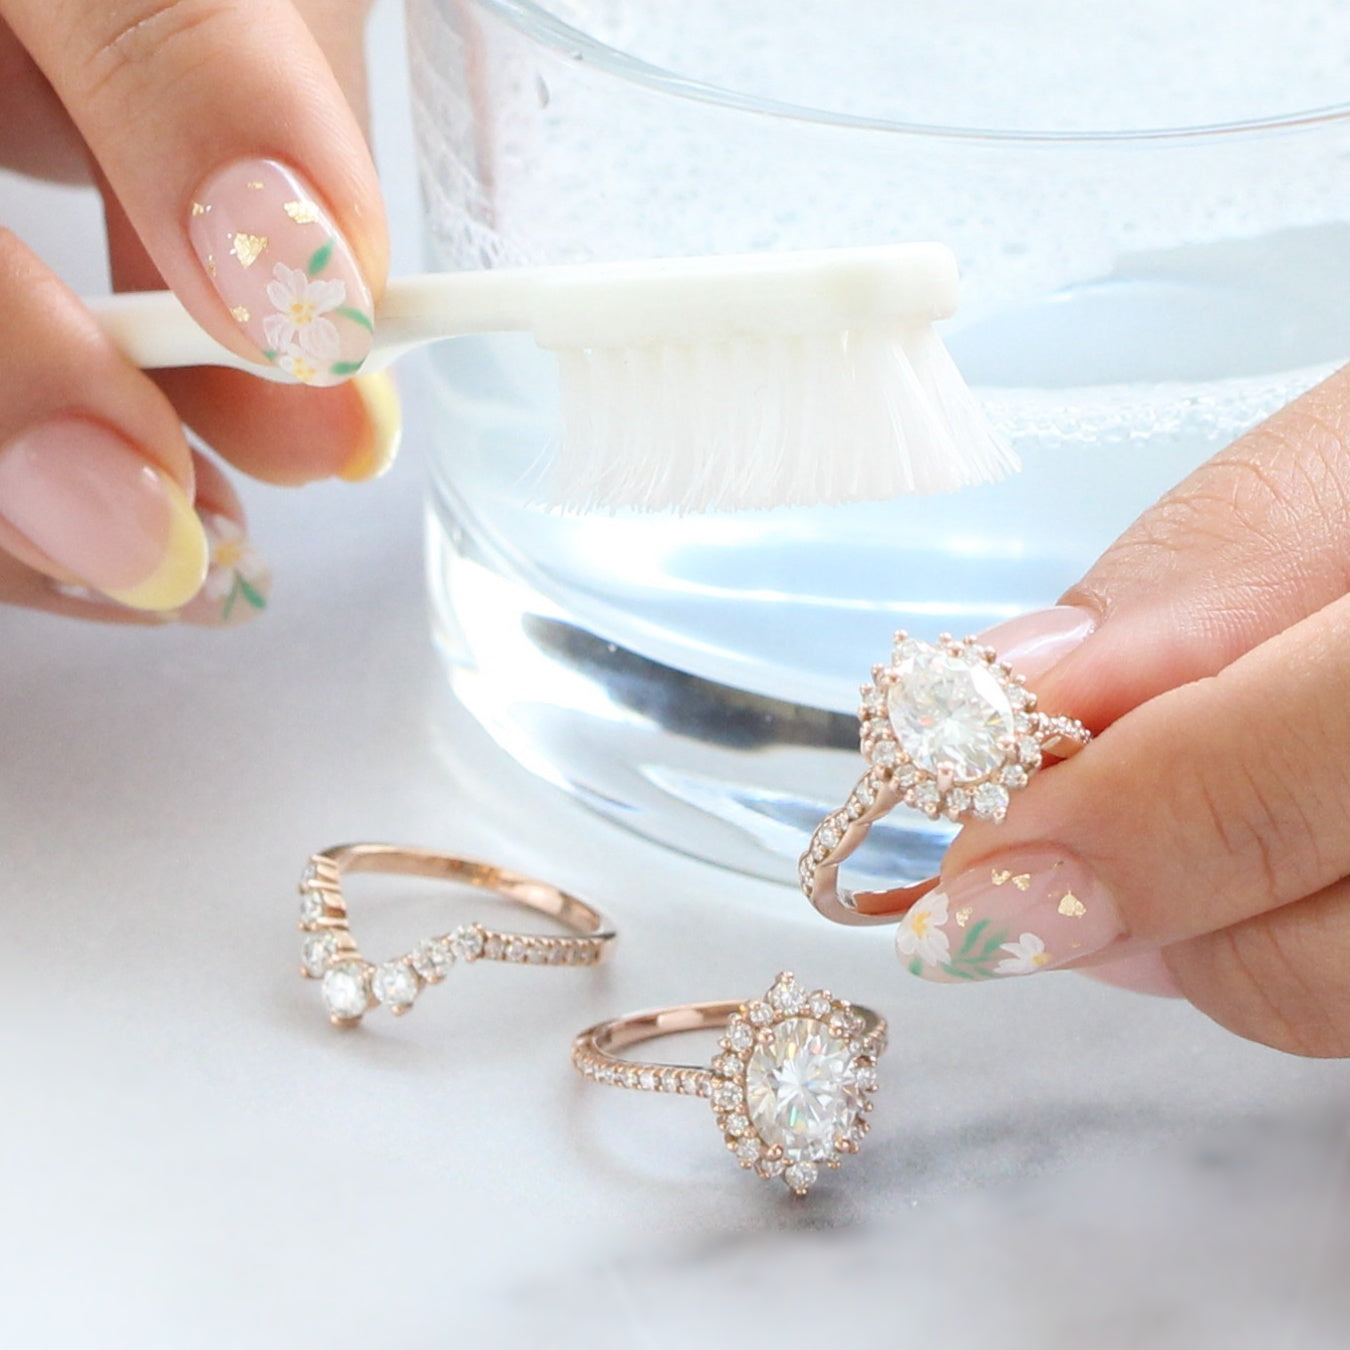 How to Clean GoldPlated Jewelry So It Looks Shiny and New